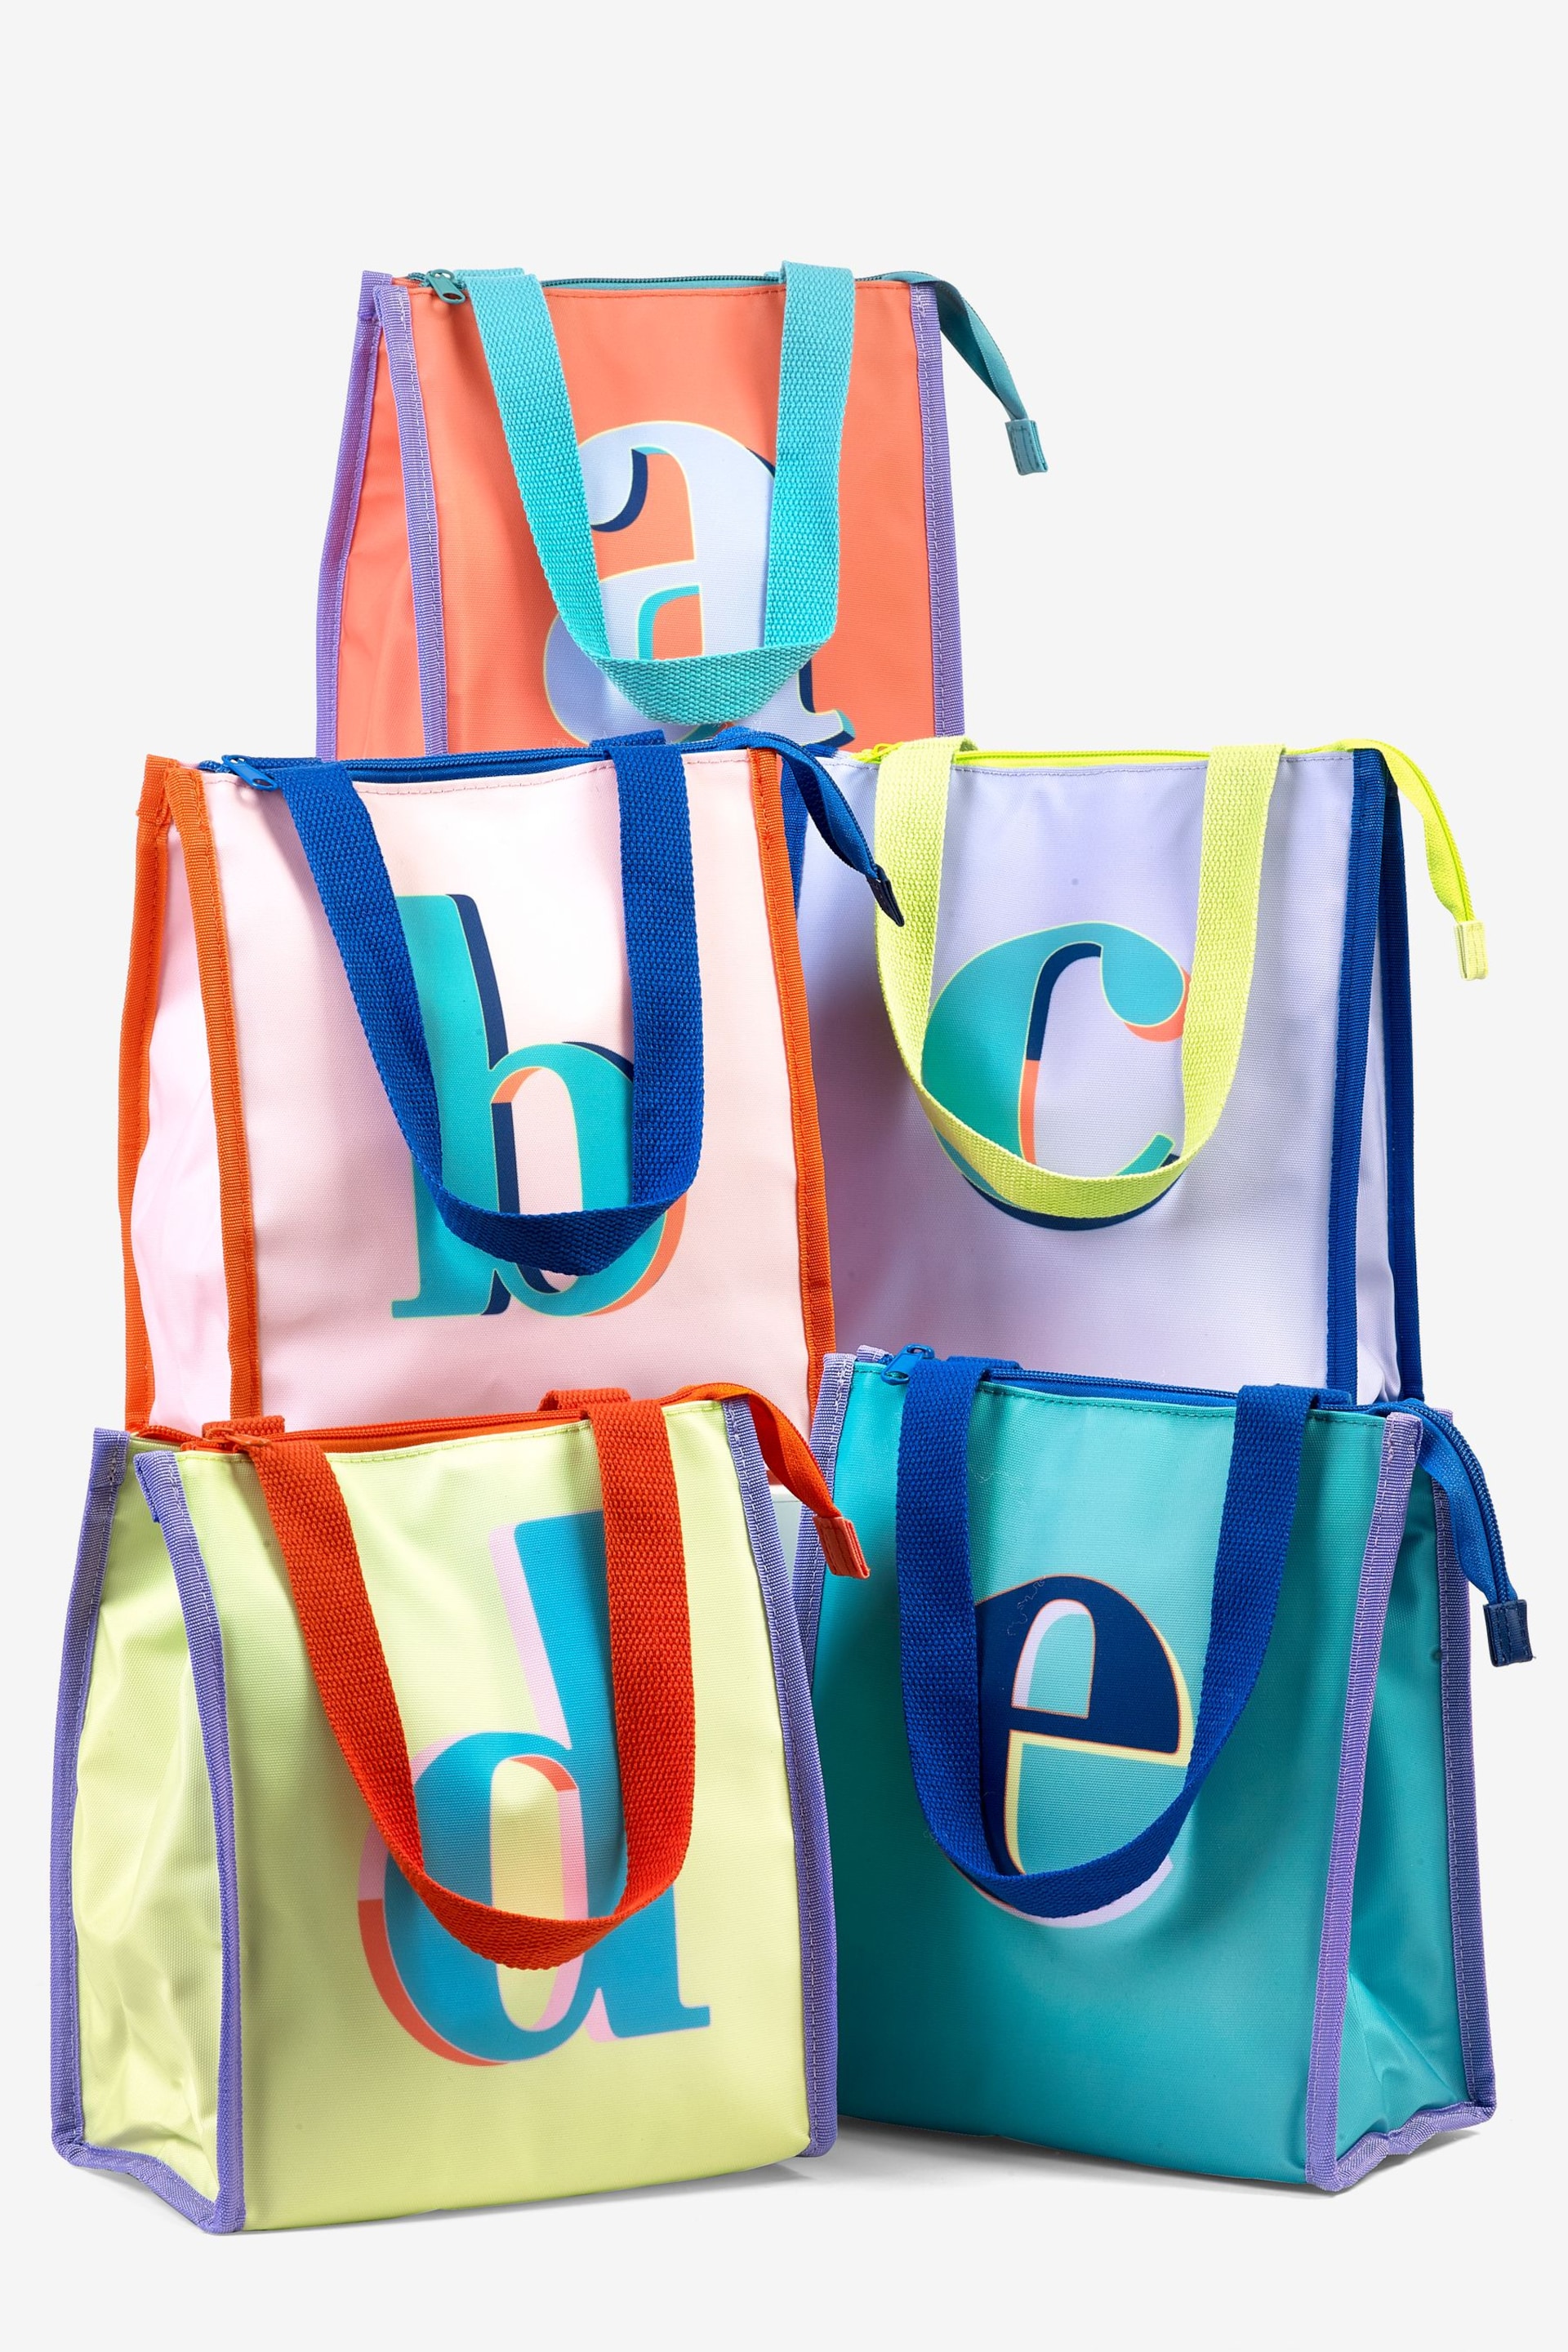 Brights Monogram Lunch Bag - Image 2 of 4